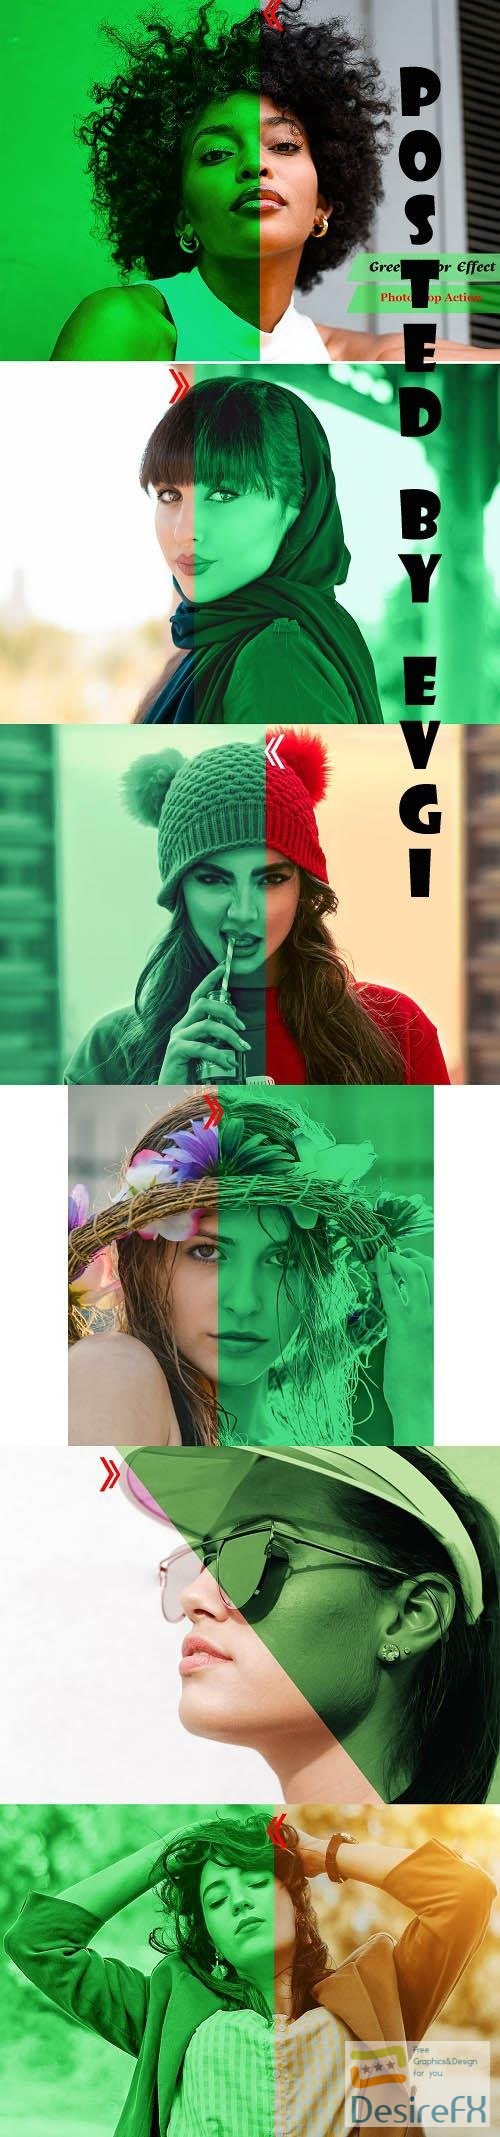 Green Color Effect Photoshop Action - 4939667